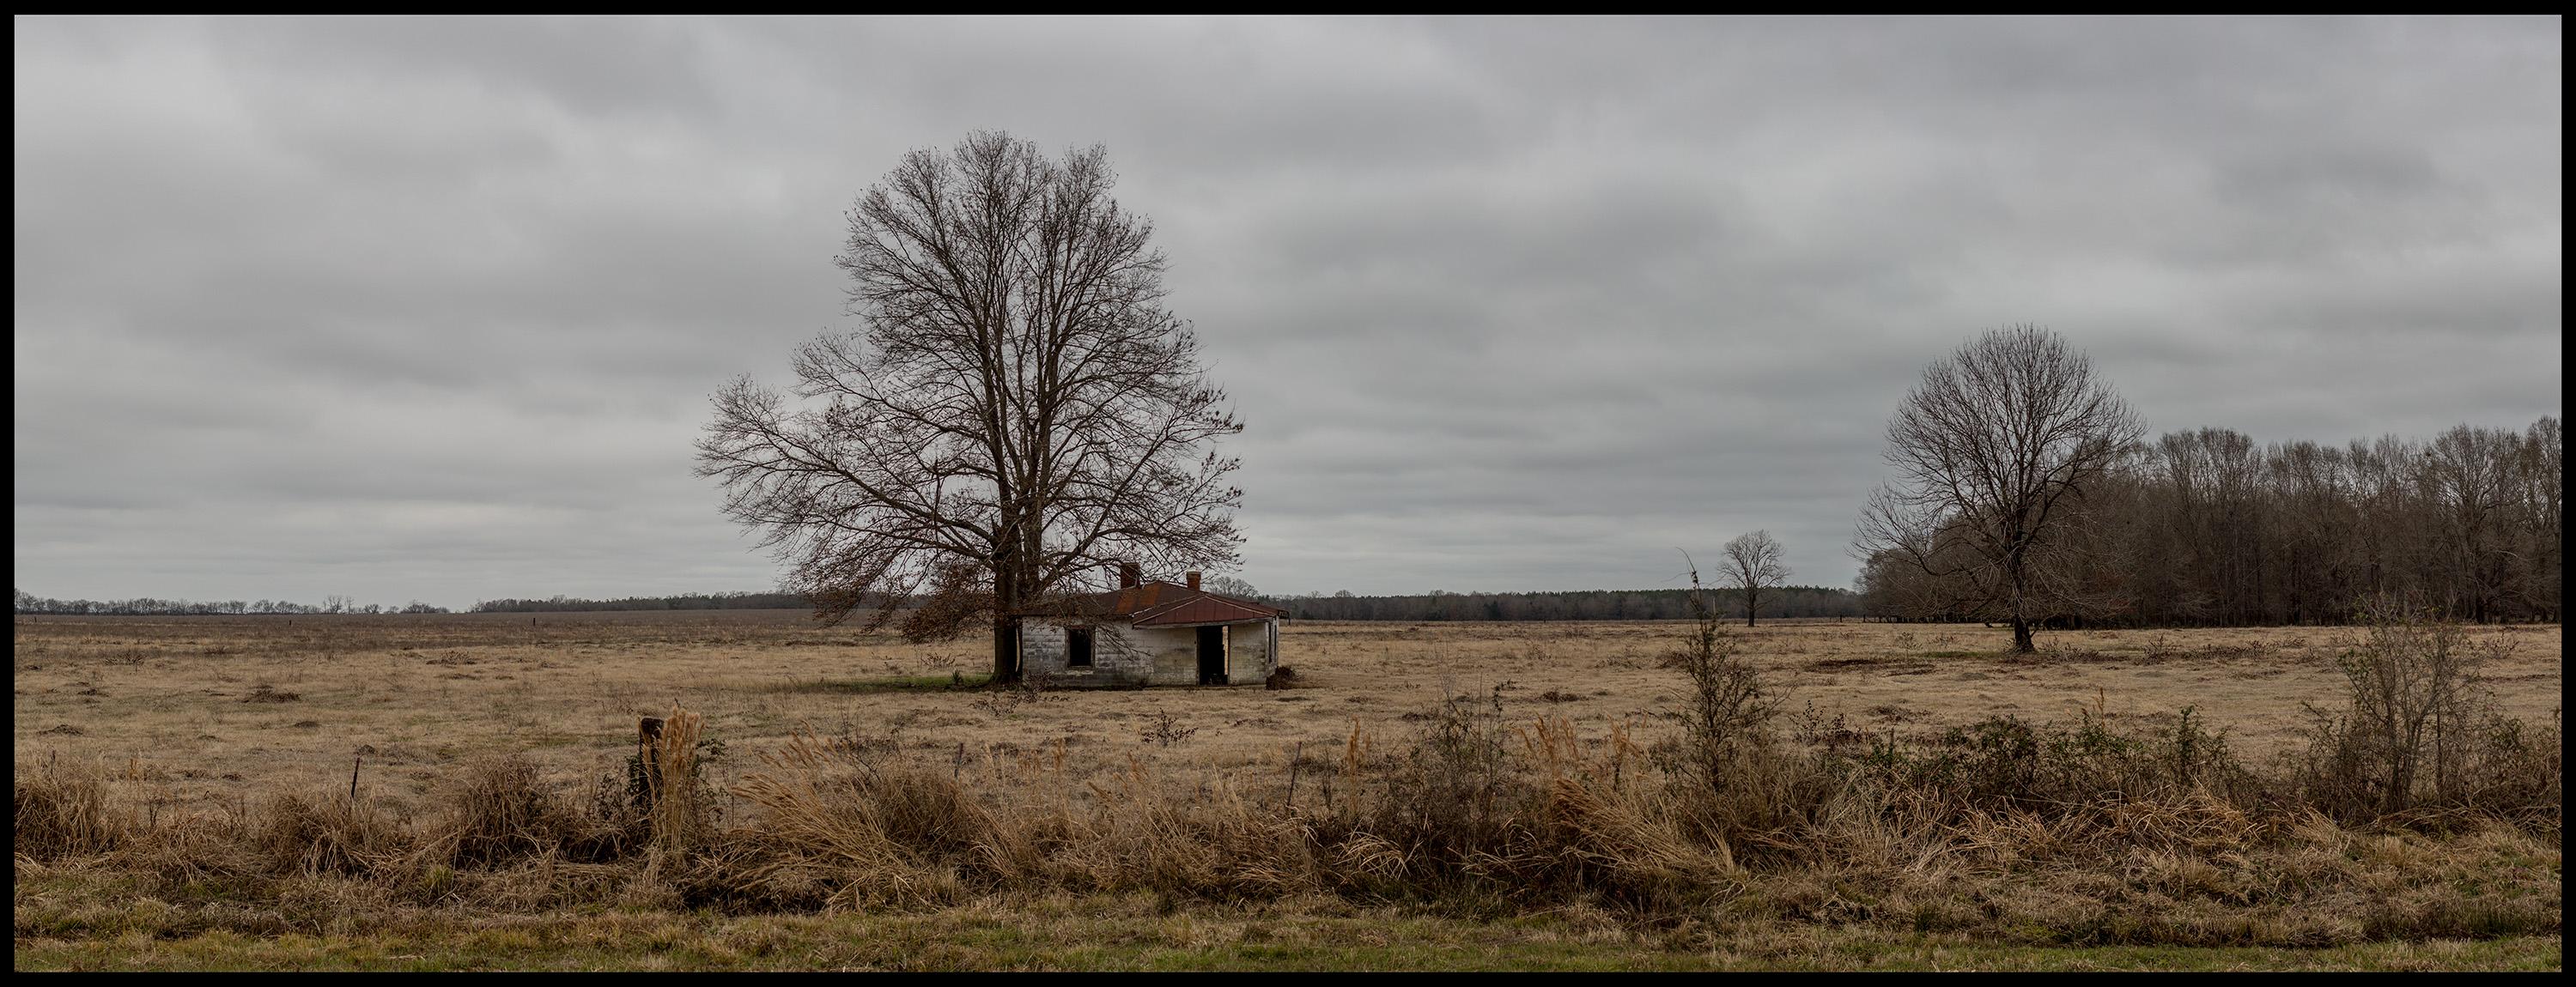 Jerry Siegel Landscape Photograph - "HWY 80, House & Tree, Dallas County, AL" - Southern Photography - Christenberry